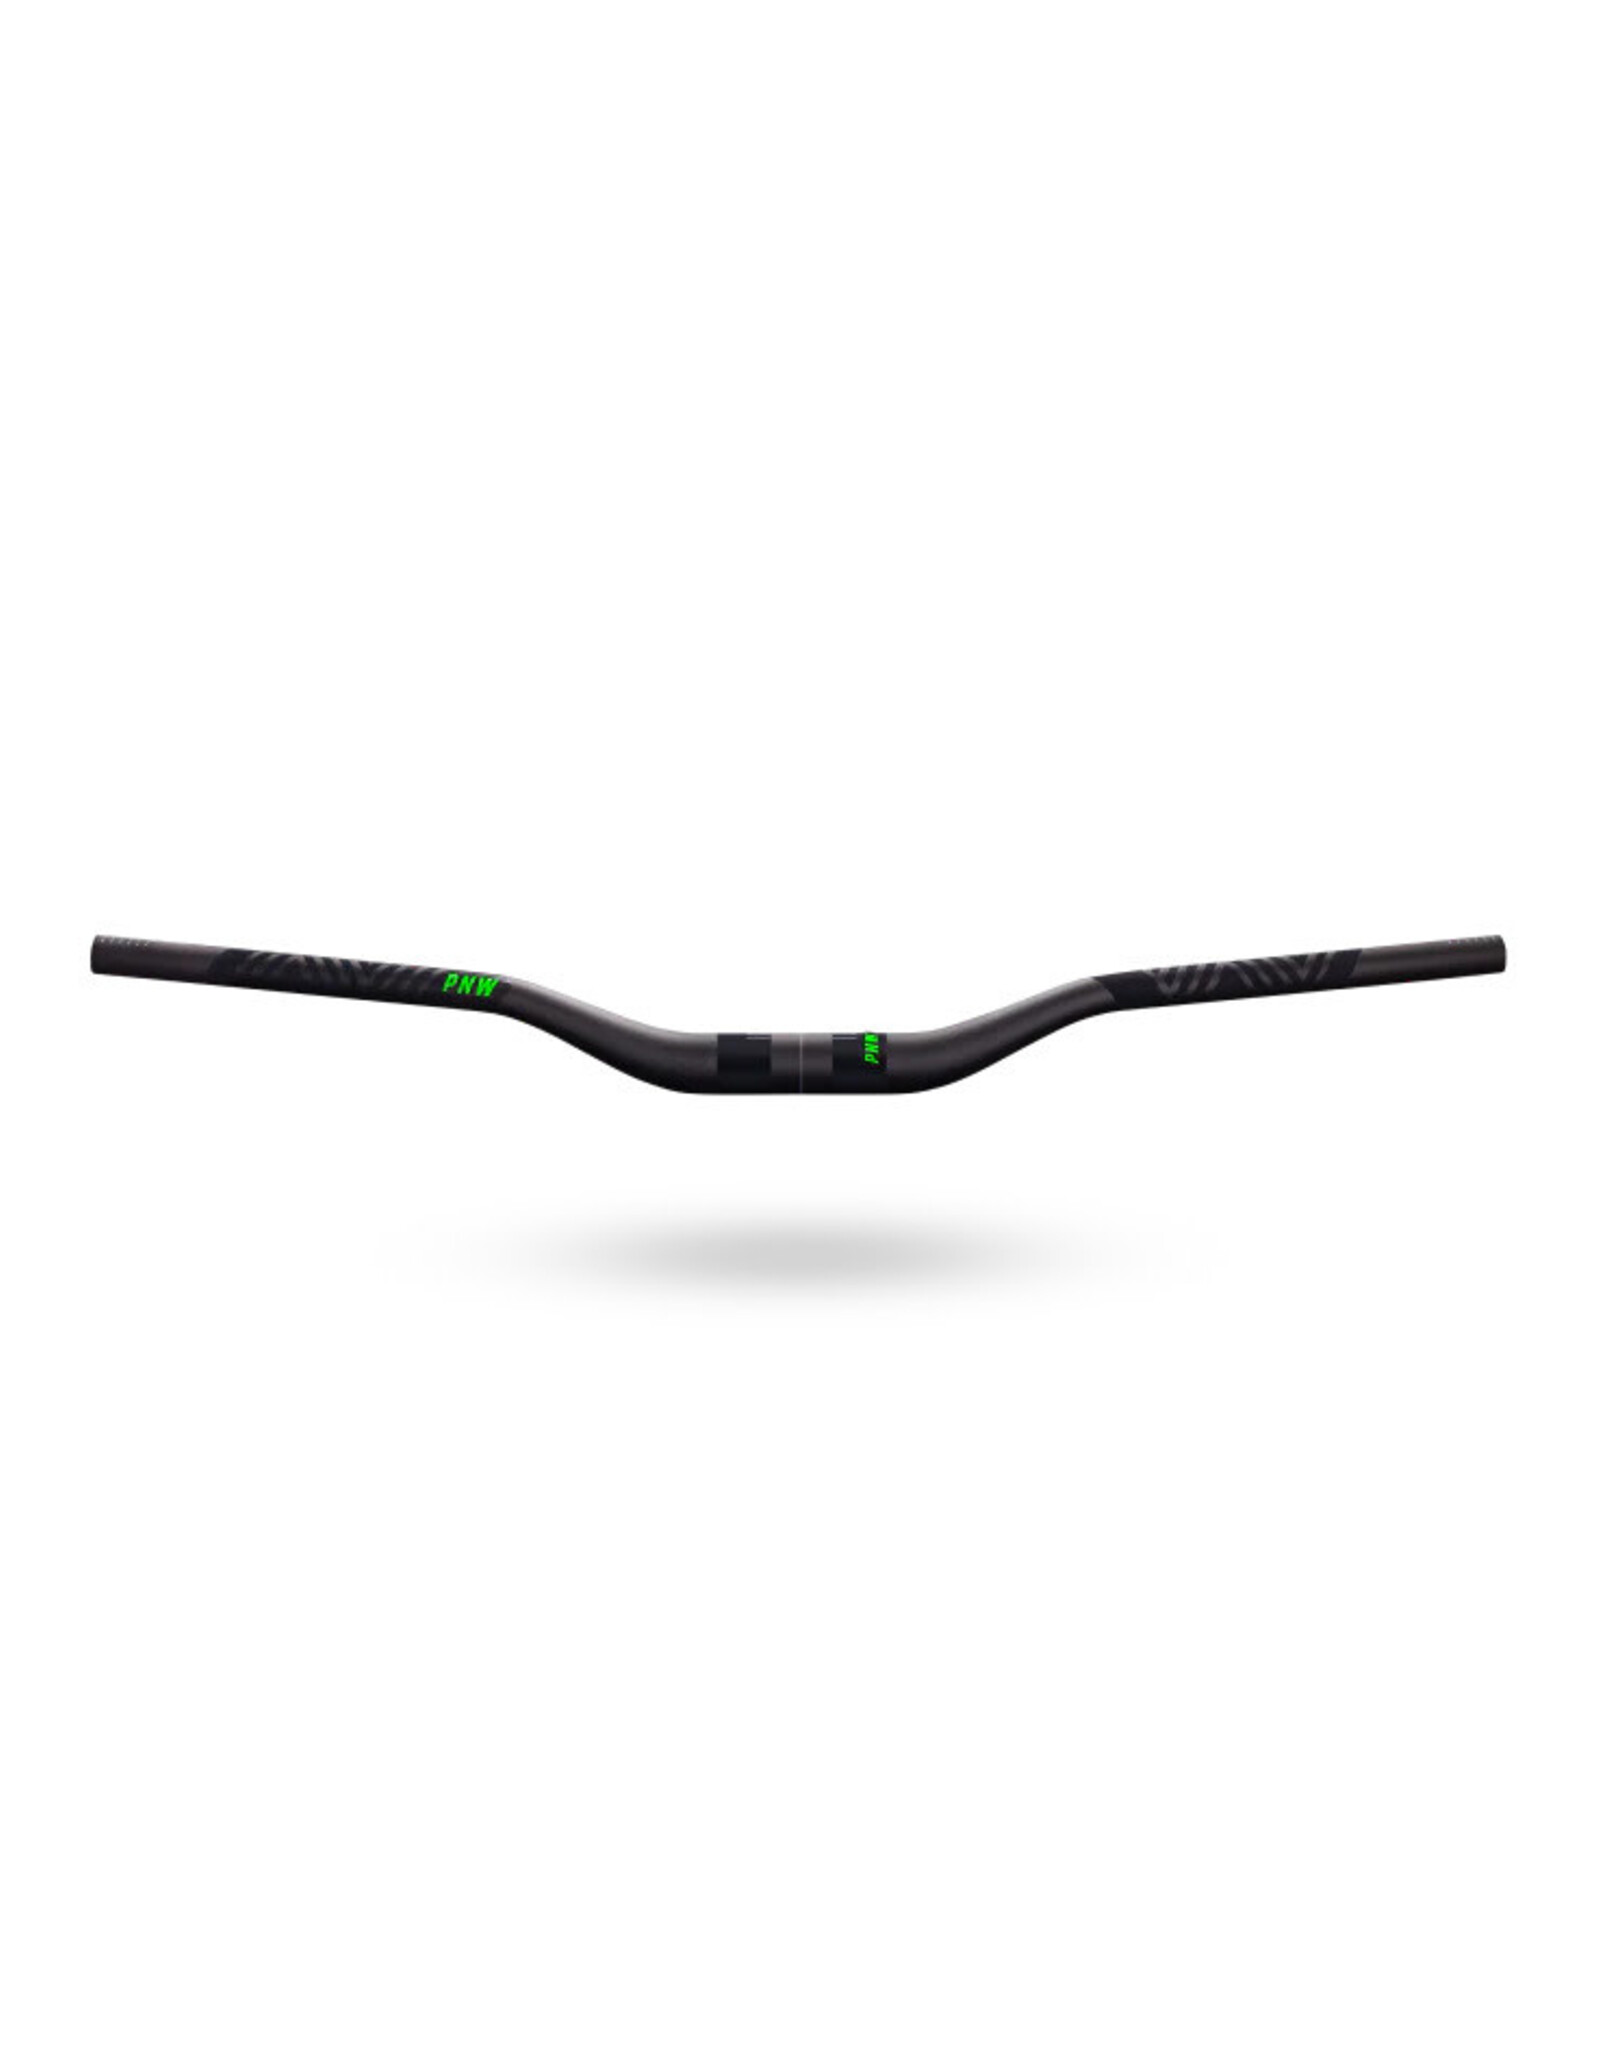 PNW Components PNW Loam Carbon Handlebar 25mm Rise 35mm Clamp